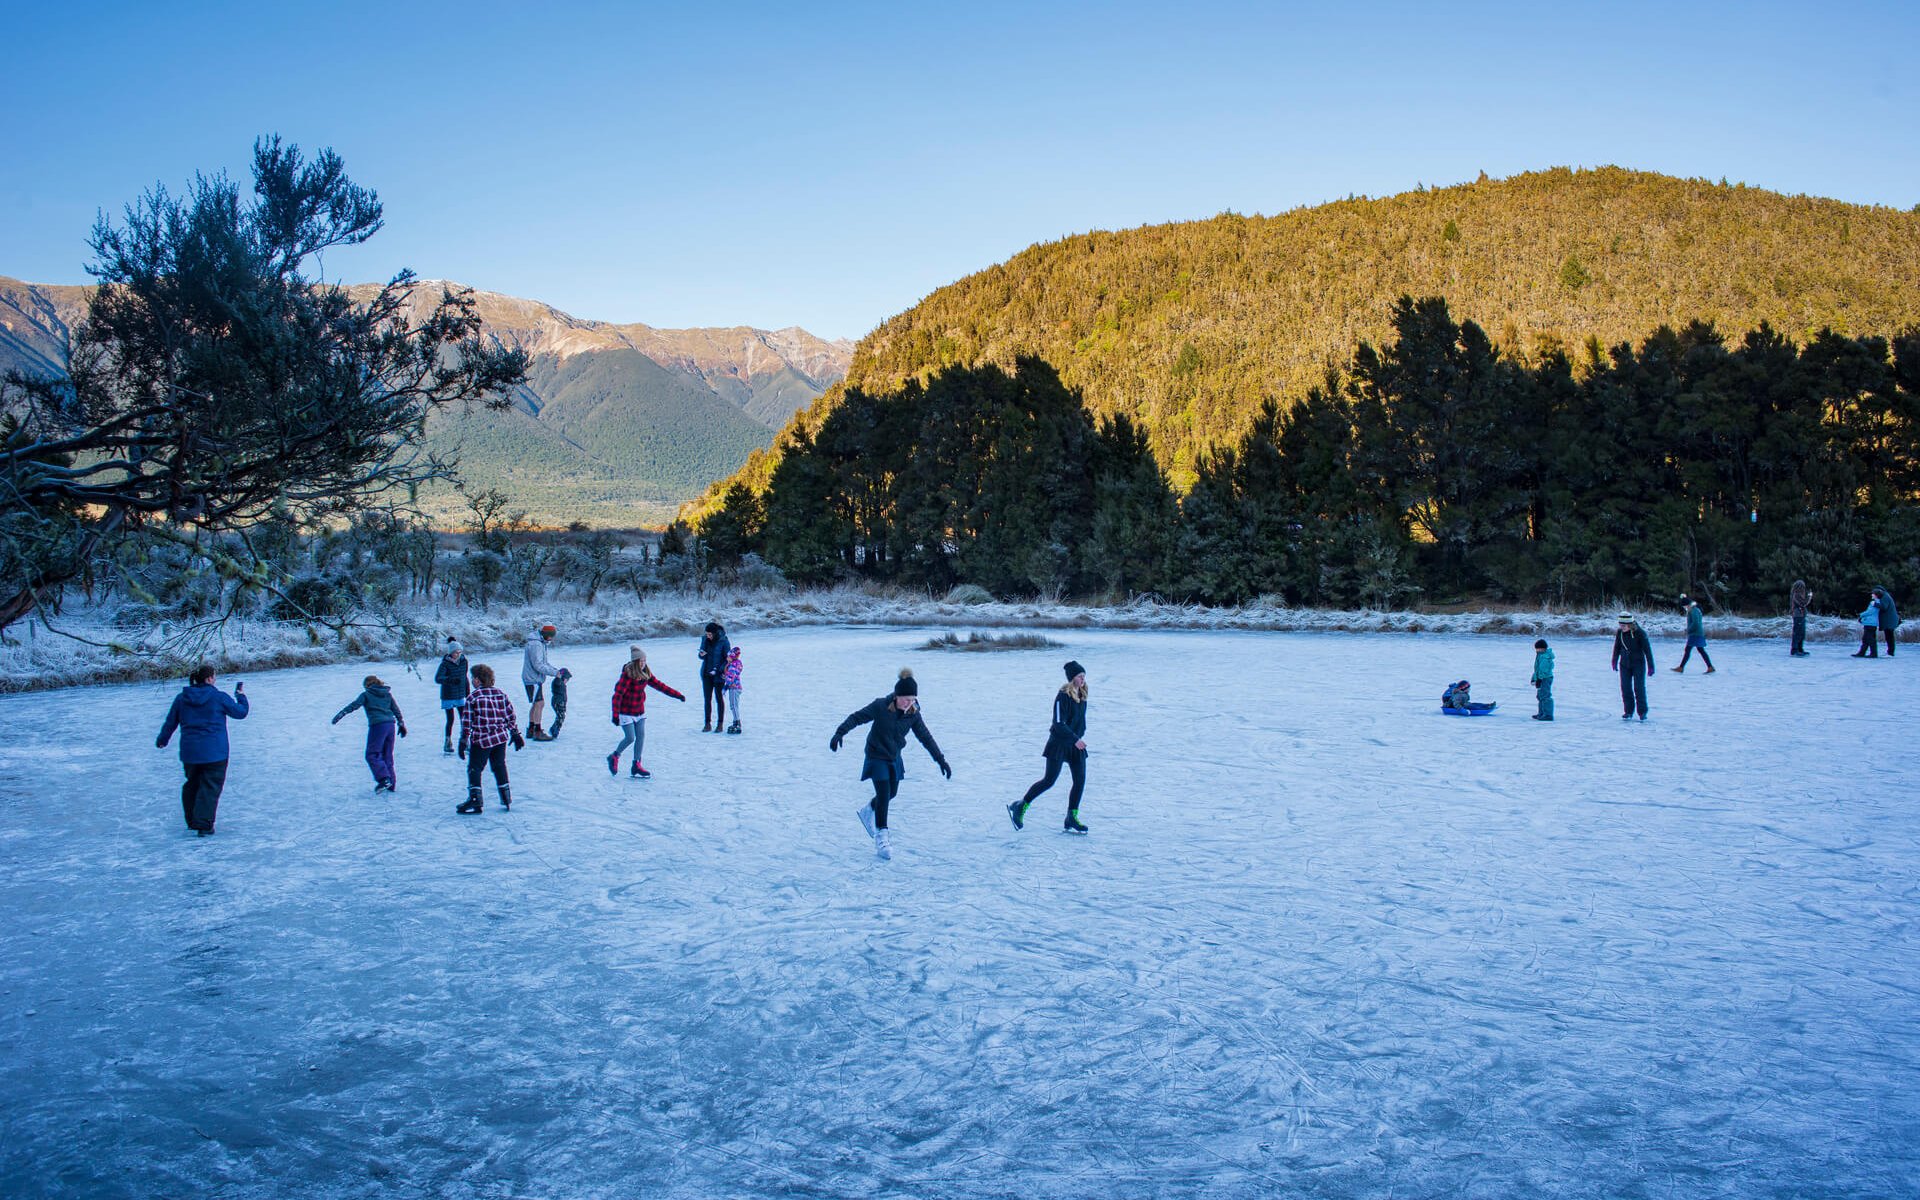 Iceskating at Teetotal in Nelson Lakes National Park